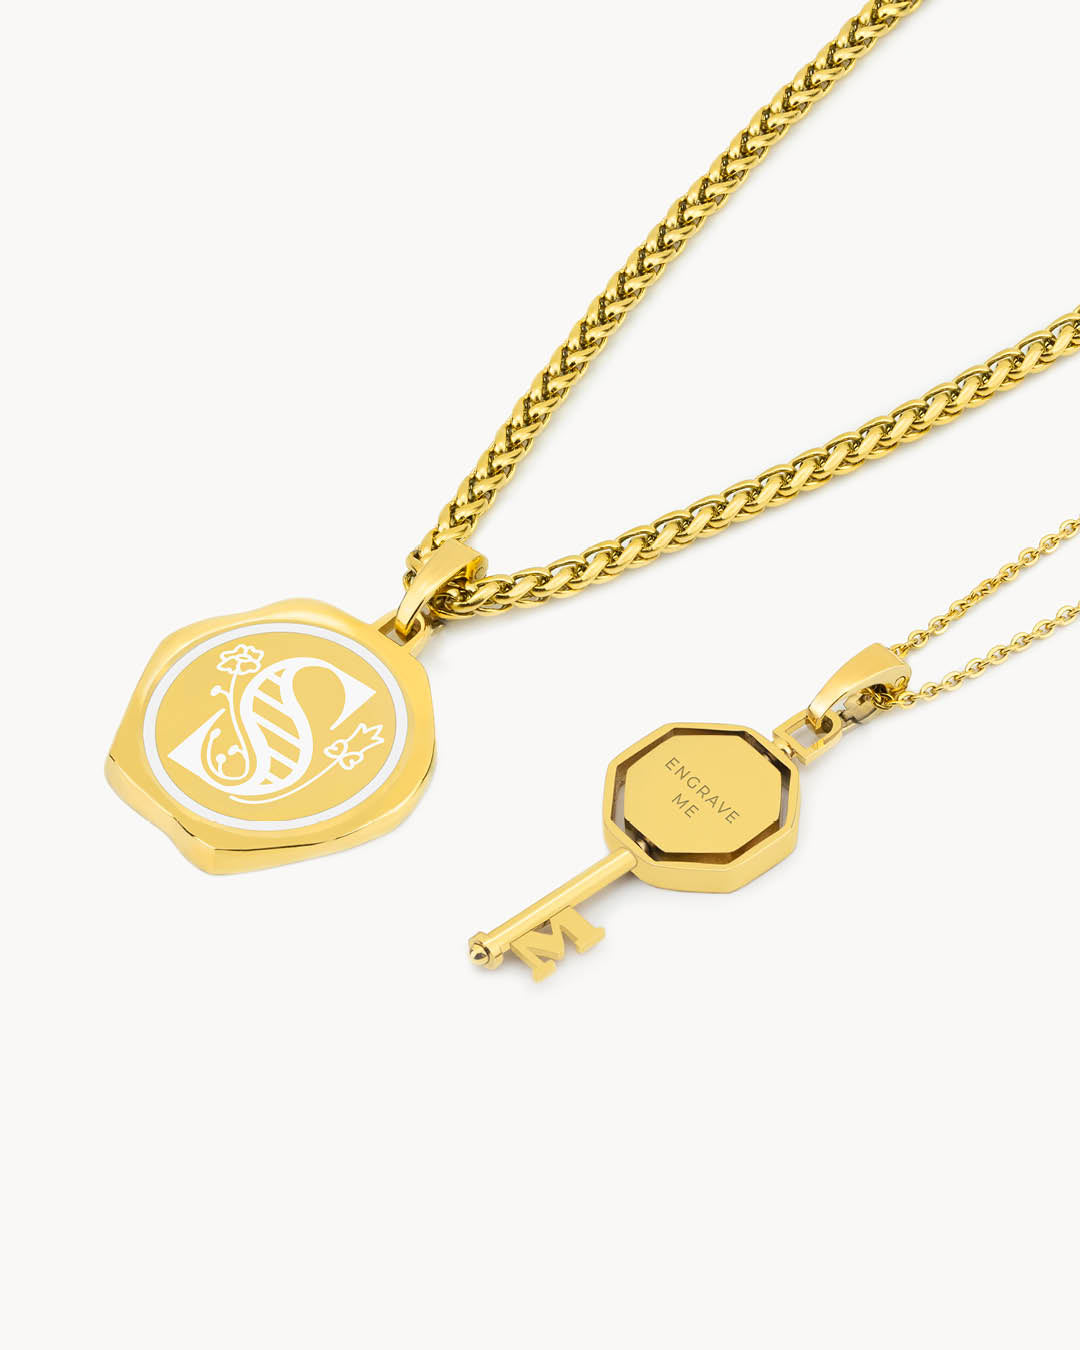 New Mum Siġill Initial with Engravable Muftieħ Necklace Set, Gold